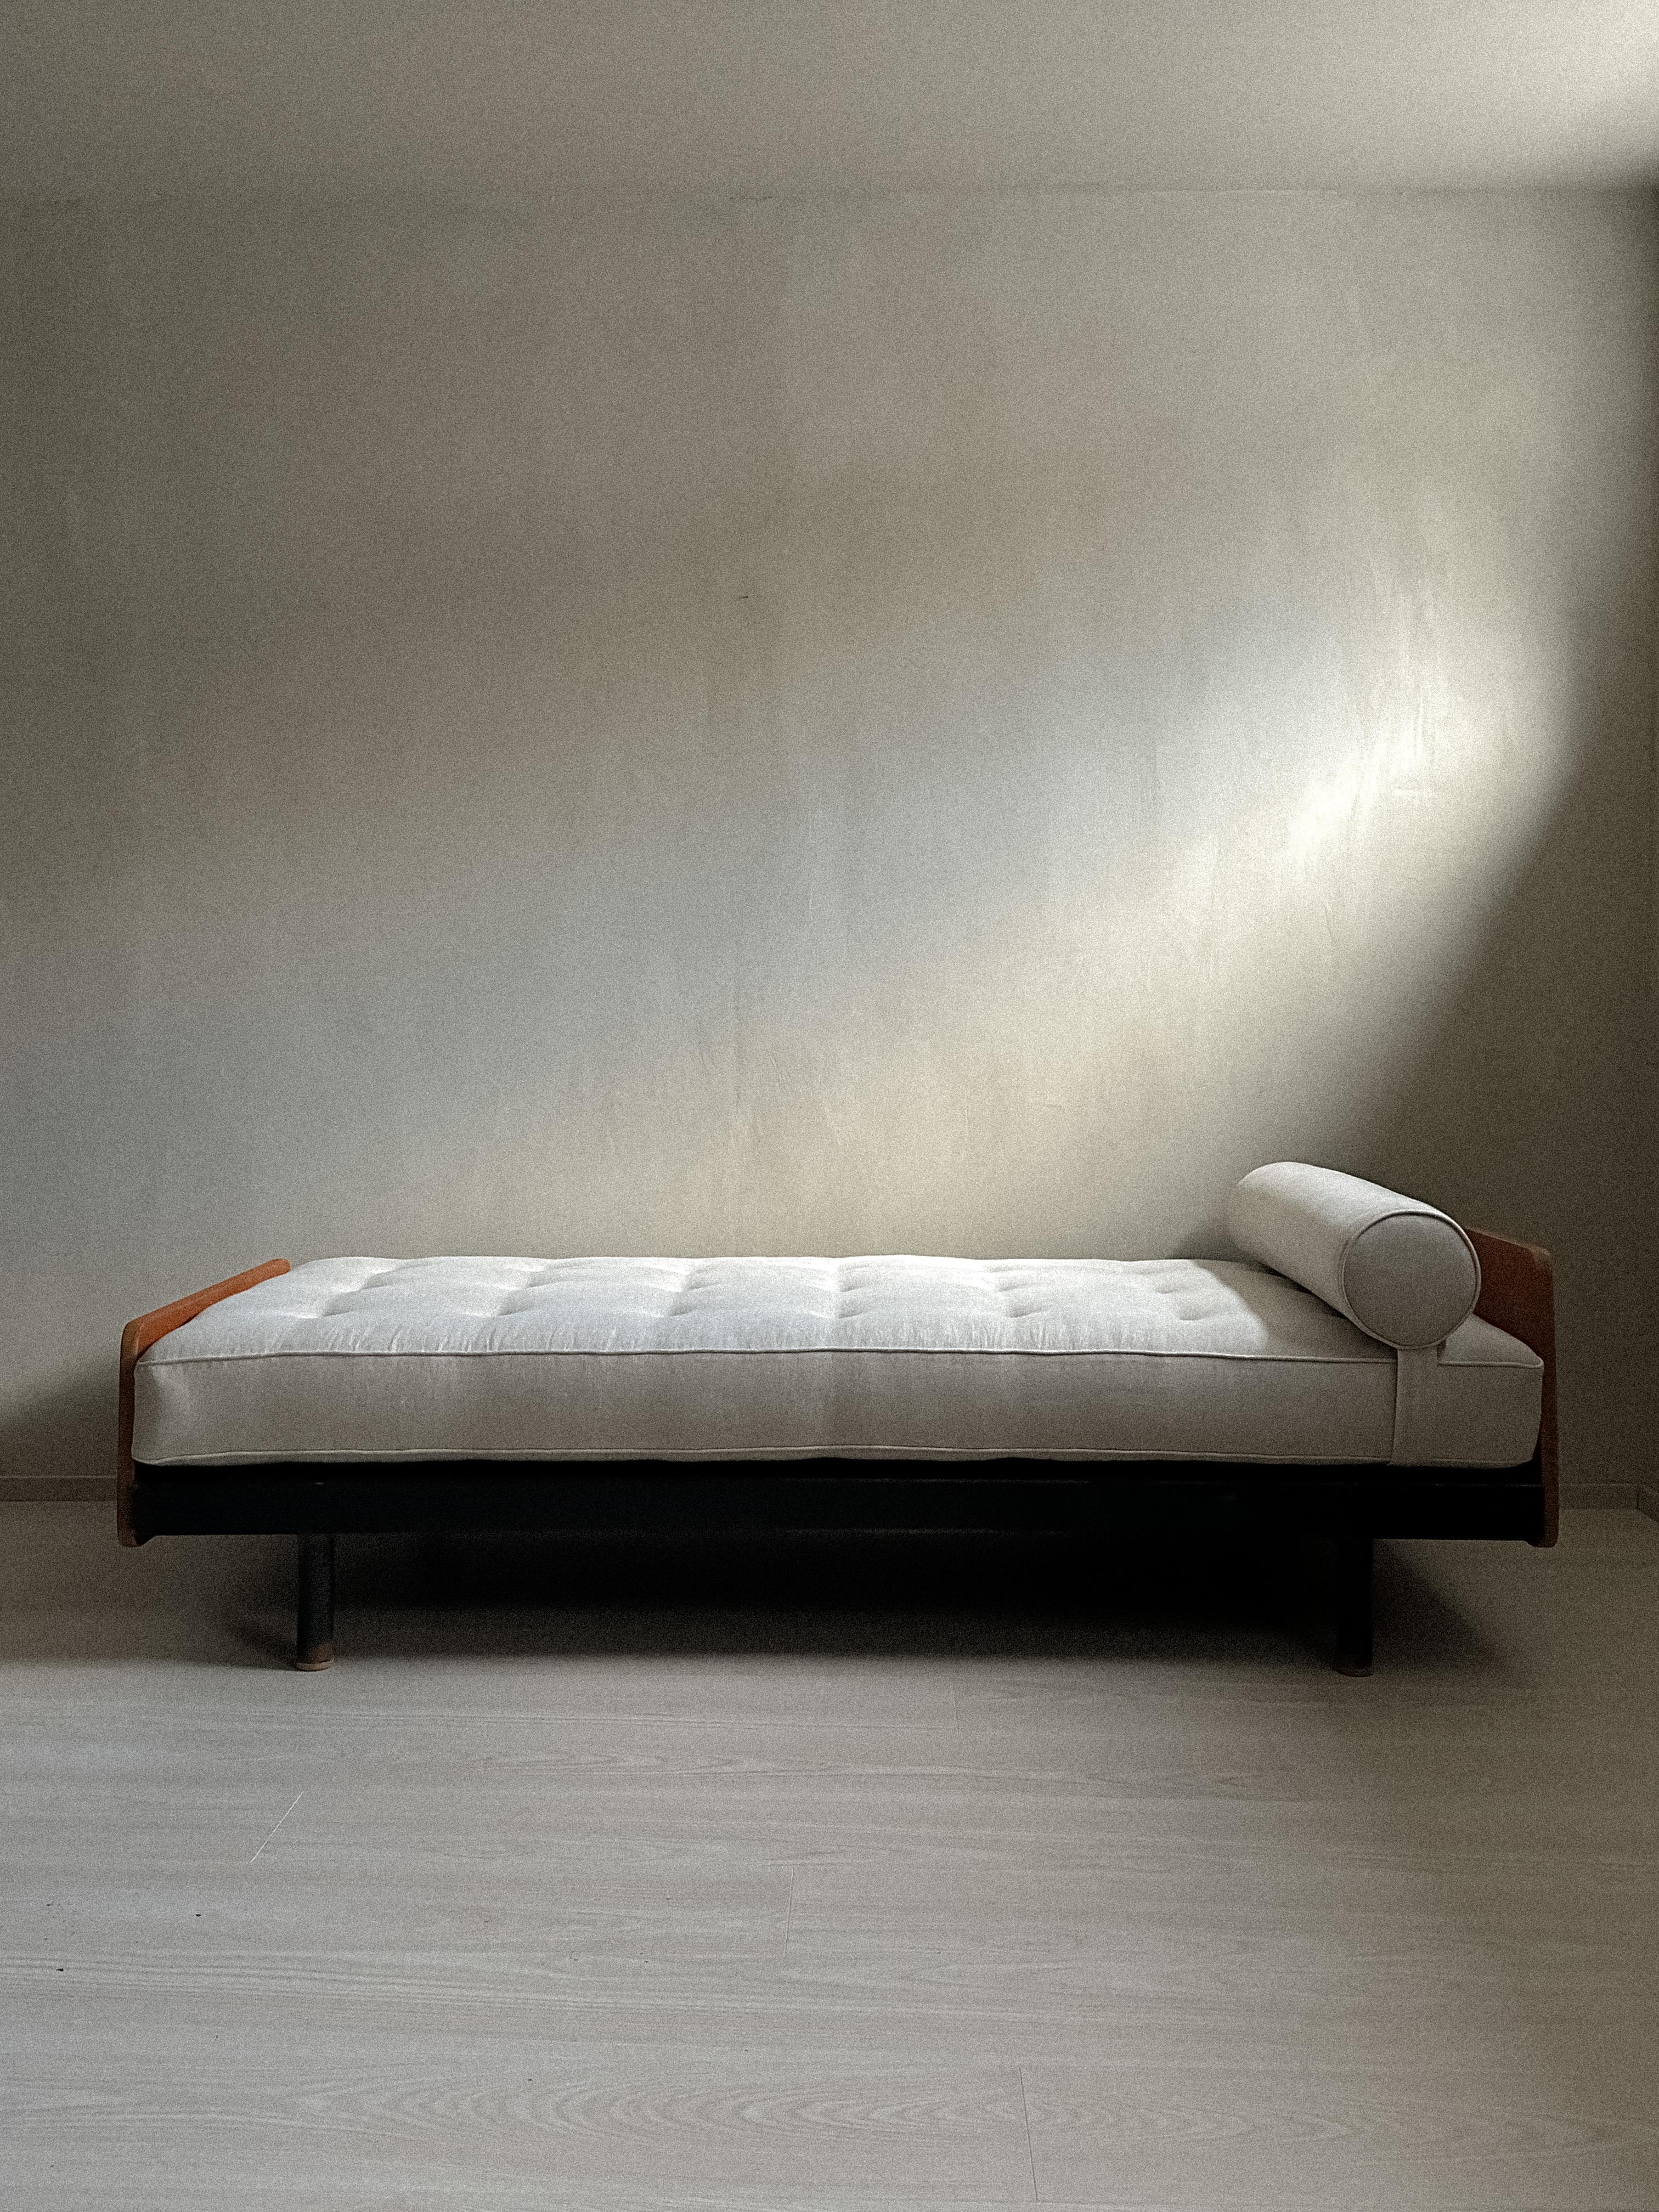 Mid-Century Modern Jean Prouvé S.C.A.L Daybed, Metal and Wood, c. 1950s